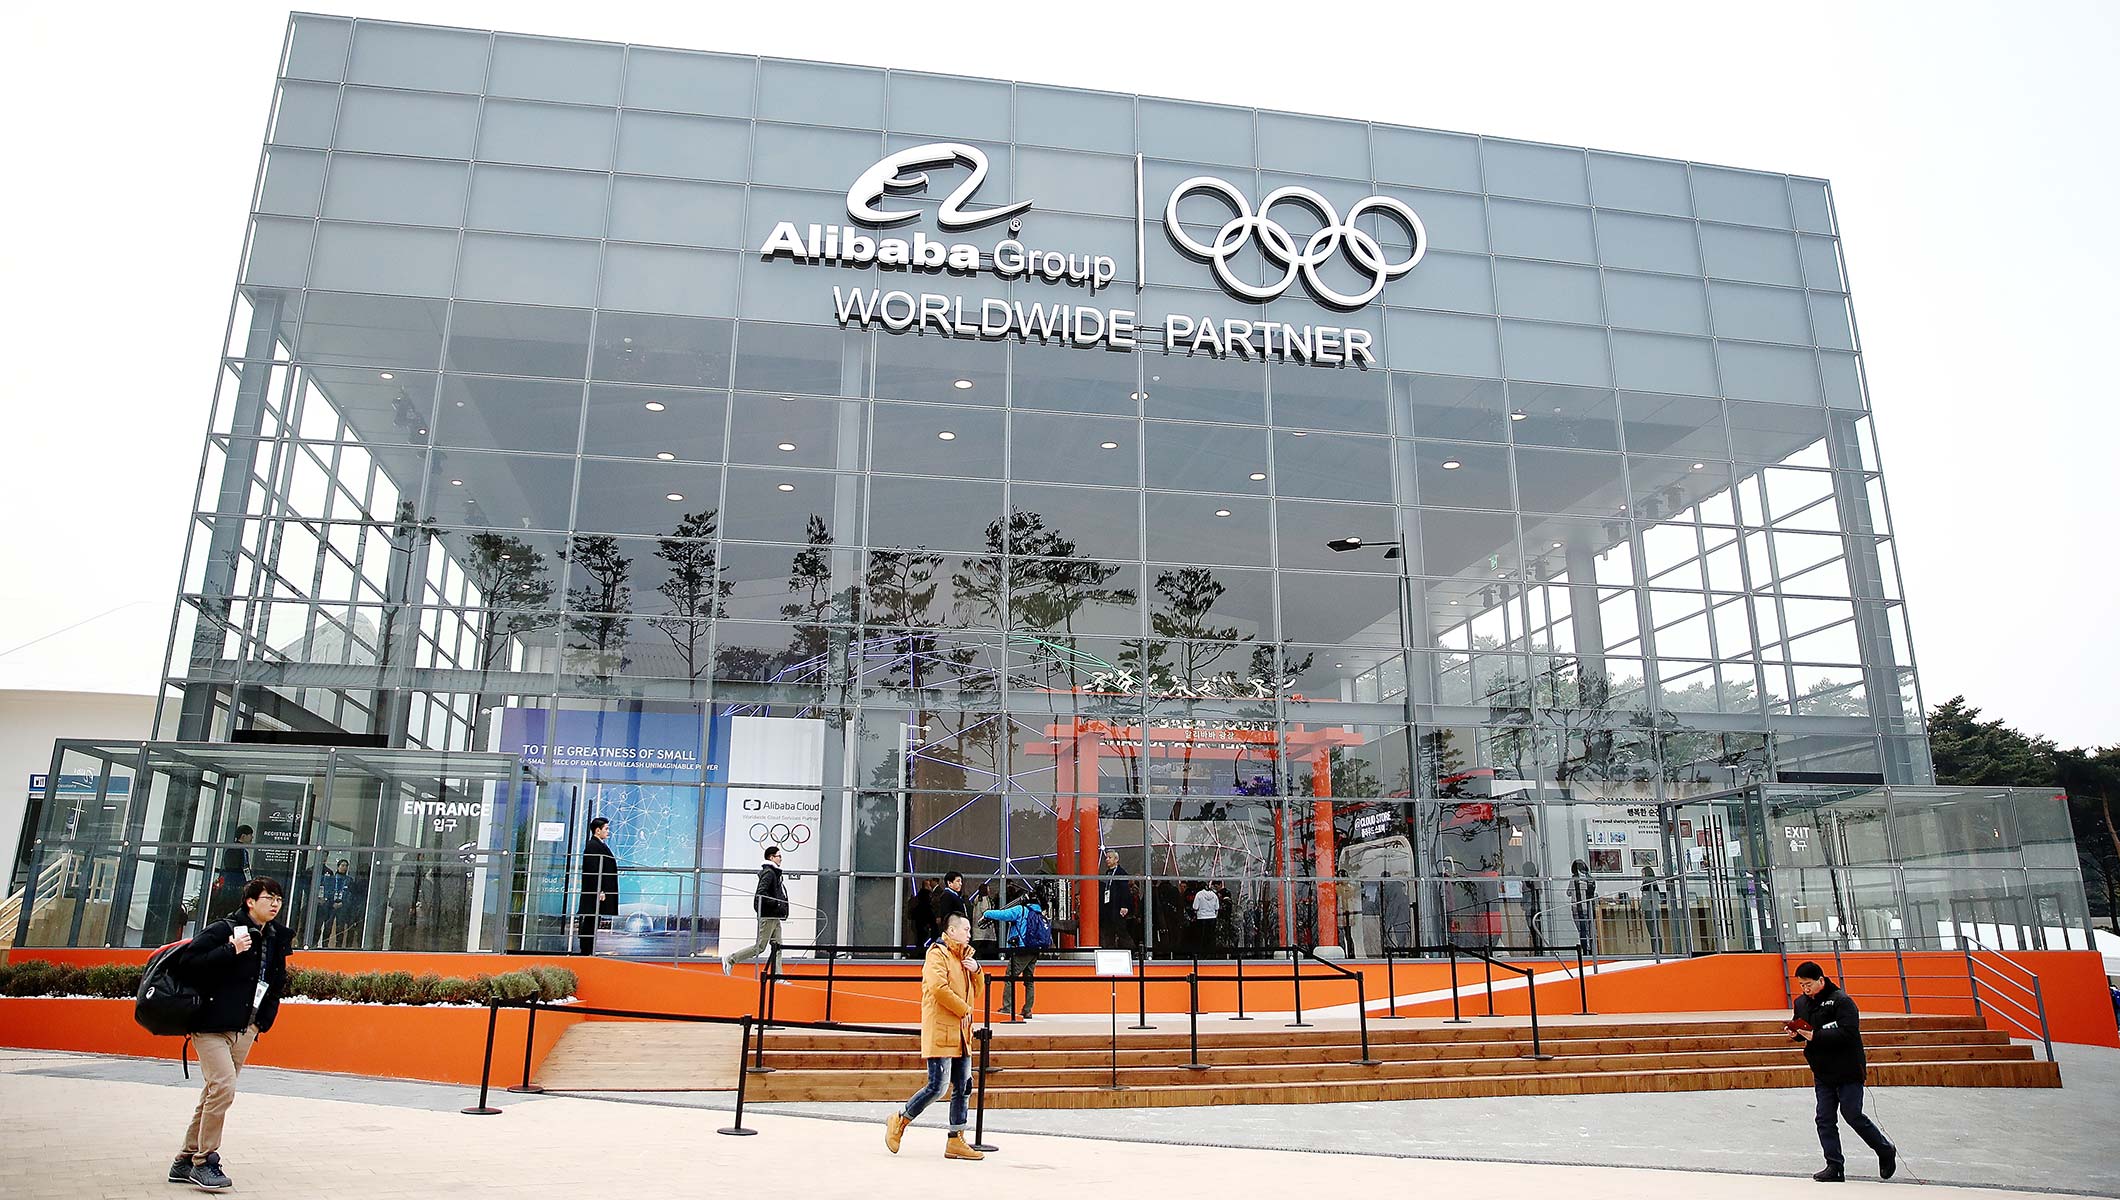 Alibaba group | The Greatness of Small | Olympics